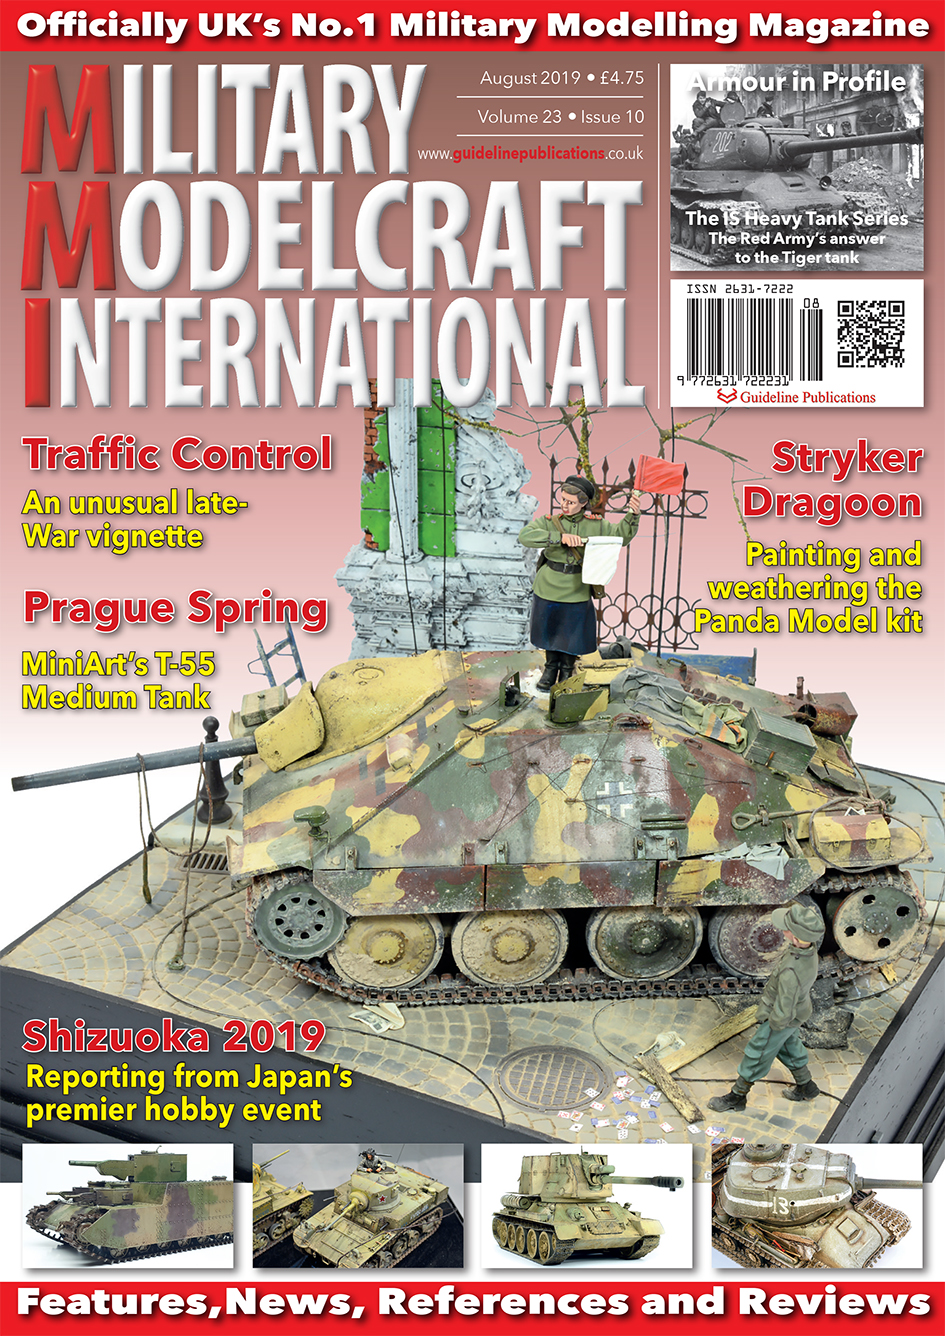 Guideline Publications Military Modelcraft Int August 2019 vol 23-10 - August  2019 